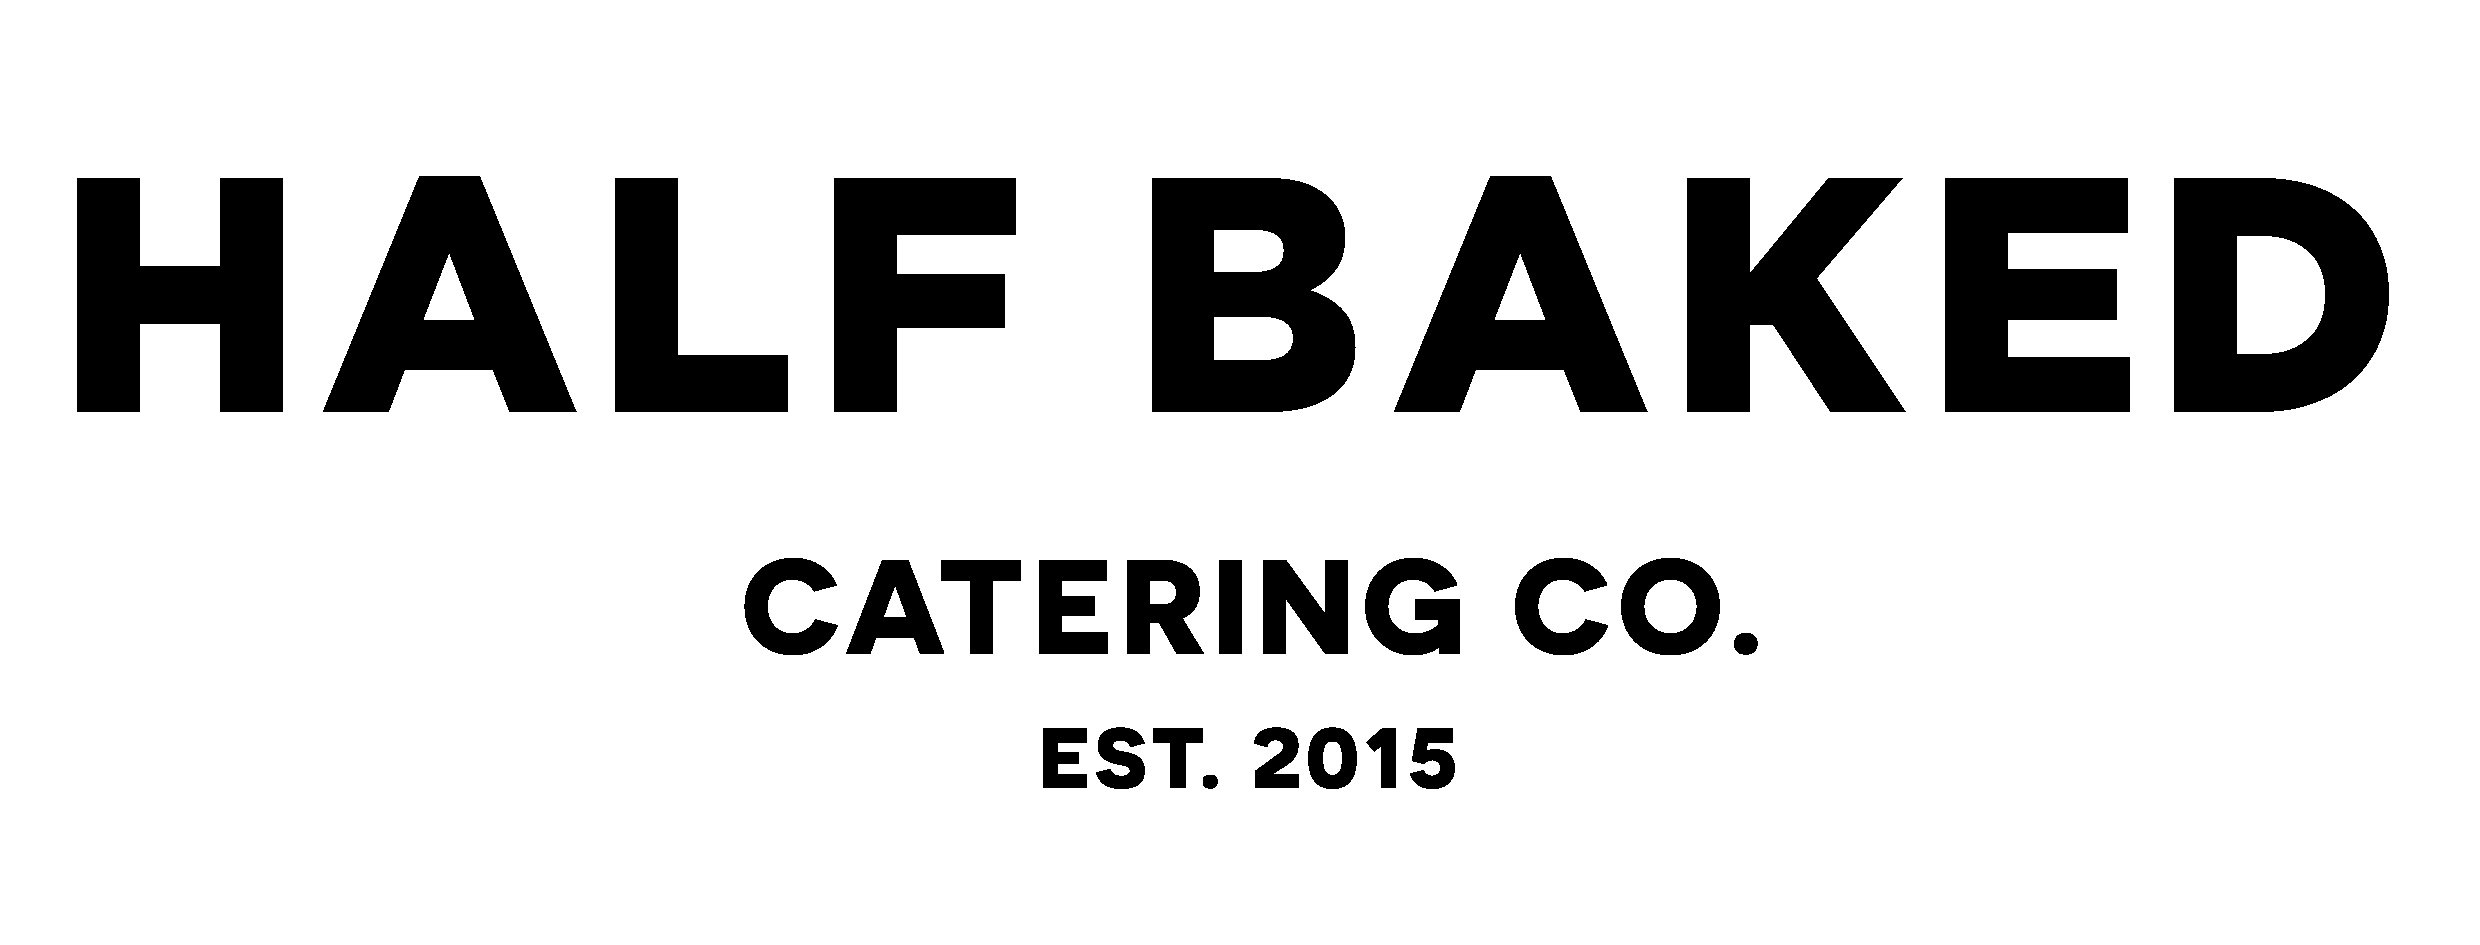 HALF BAKED CATERING CO.